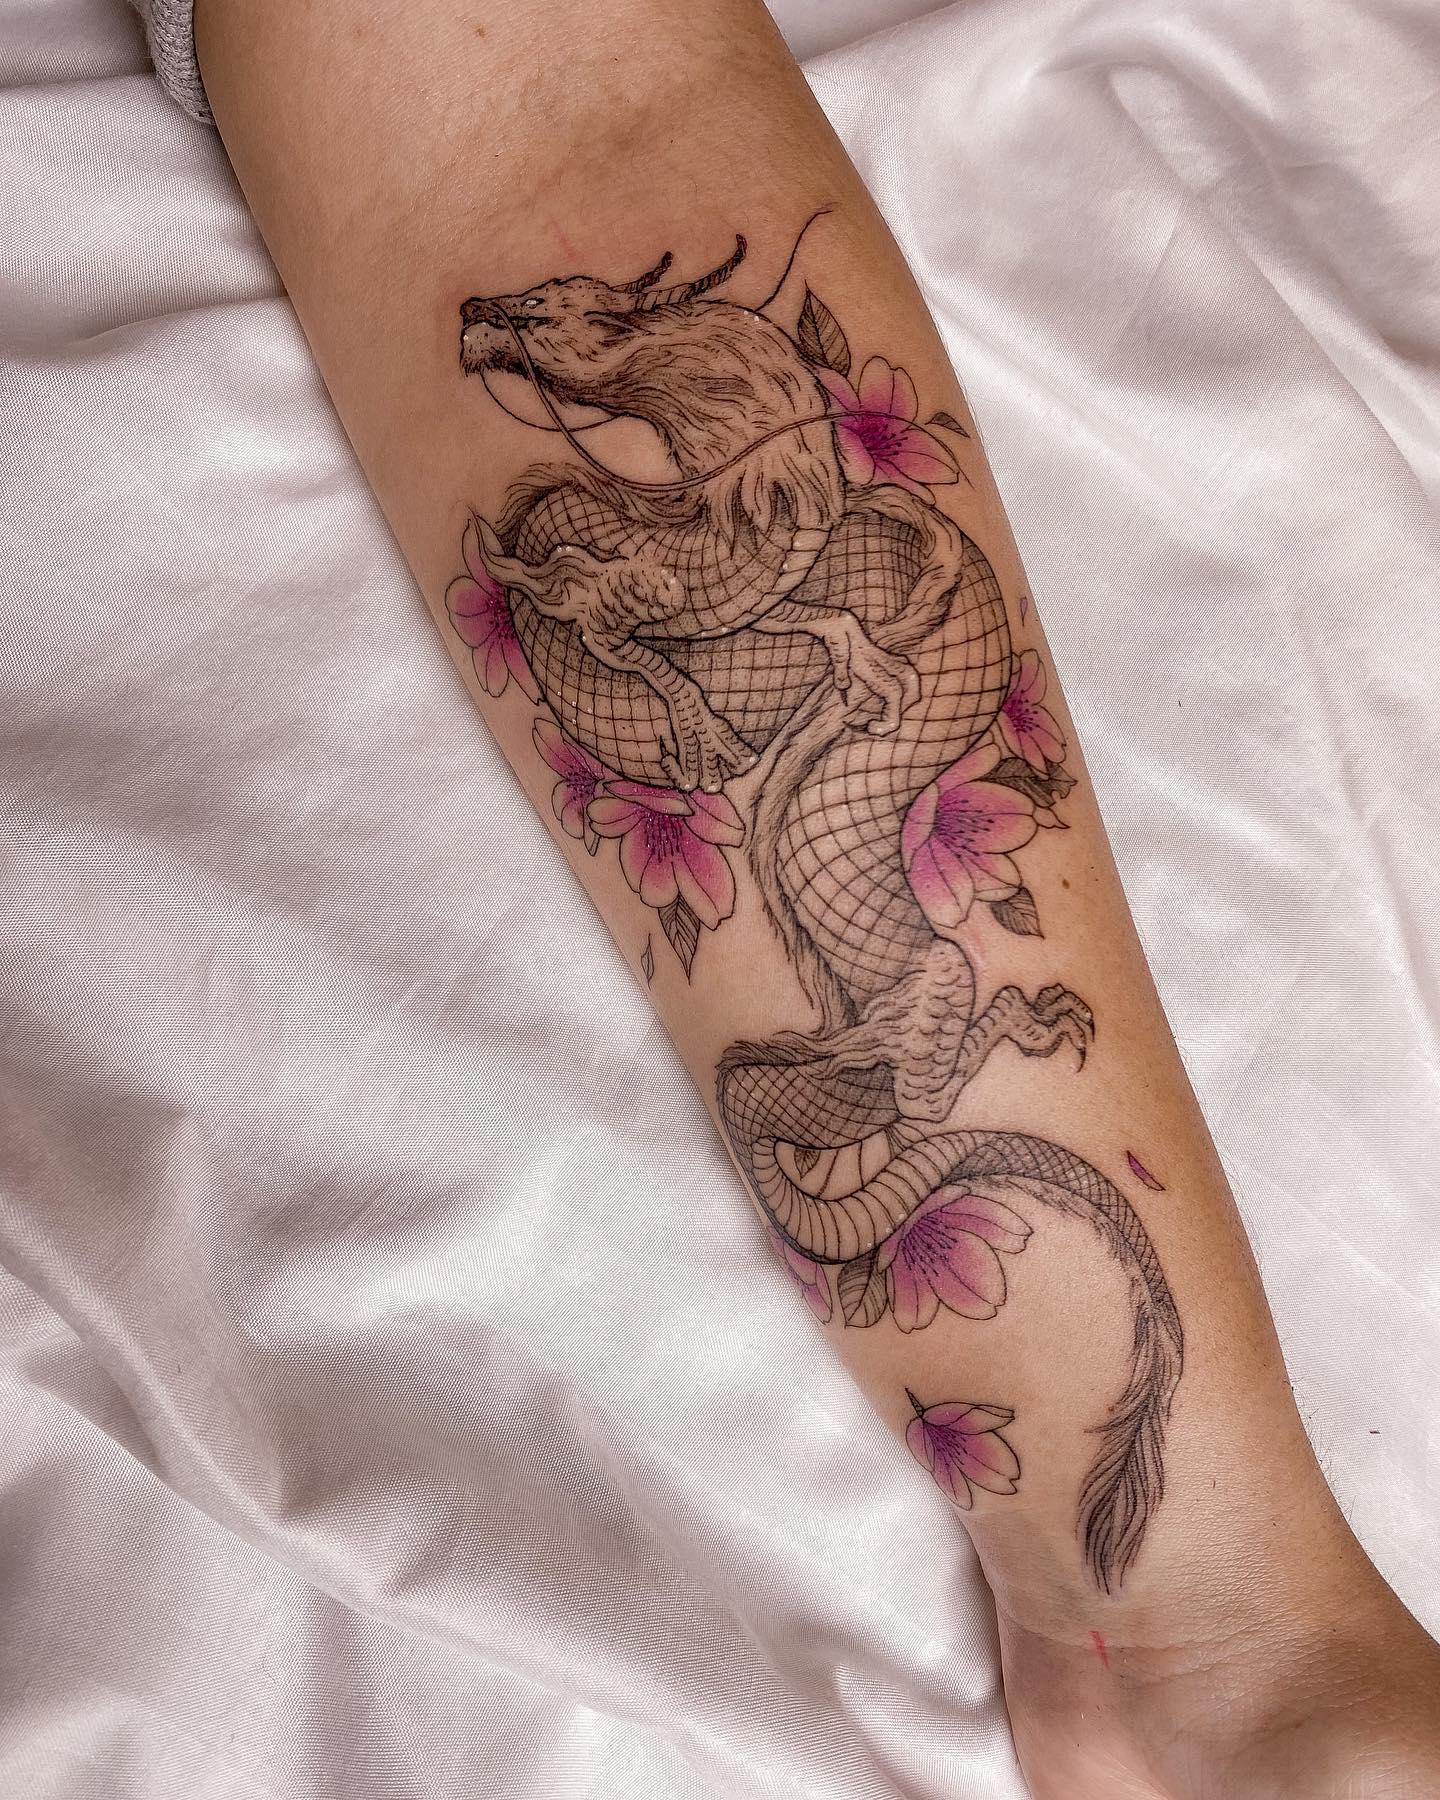 Japanese Dragon Tattoo with Pink Flowers on Arm